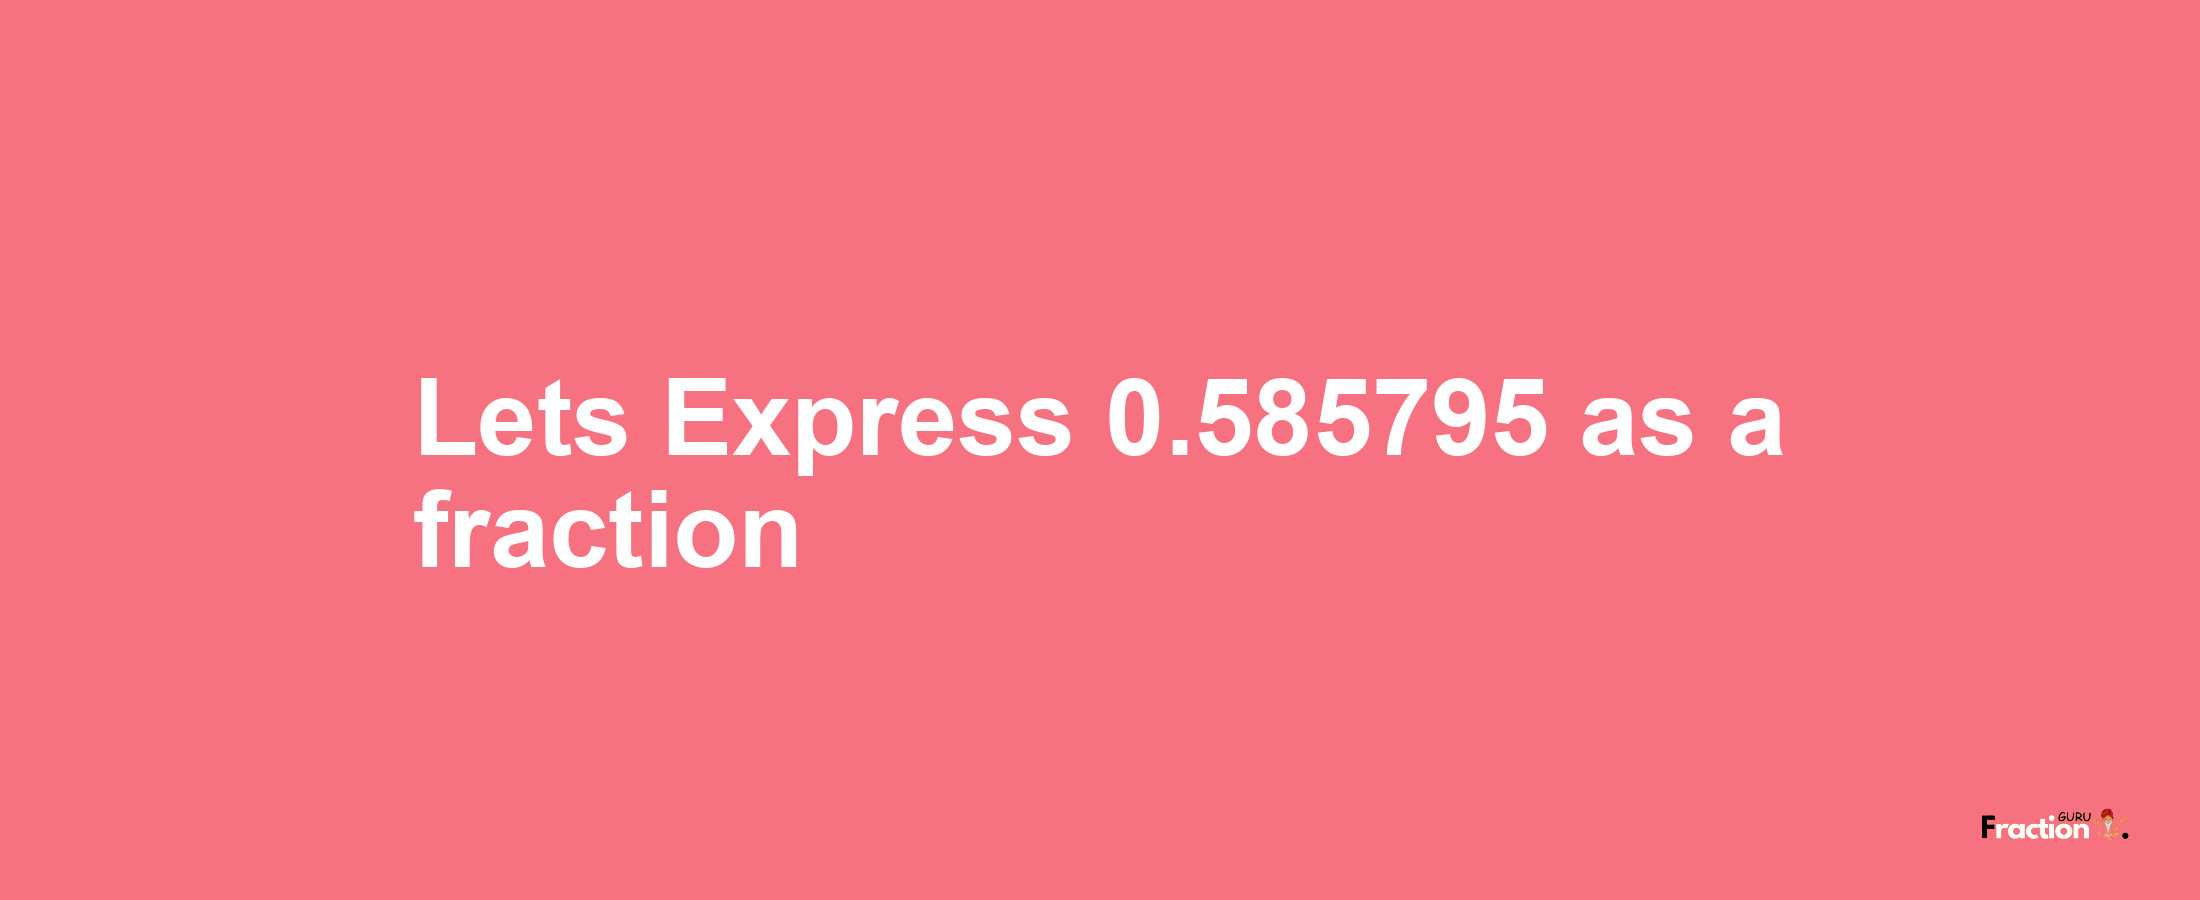 Lets Express 0.585795 as afraction